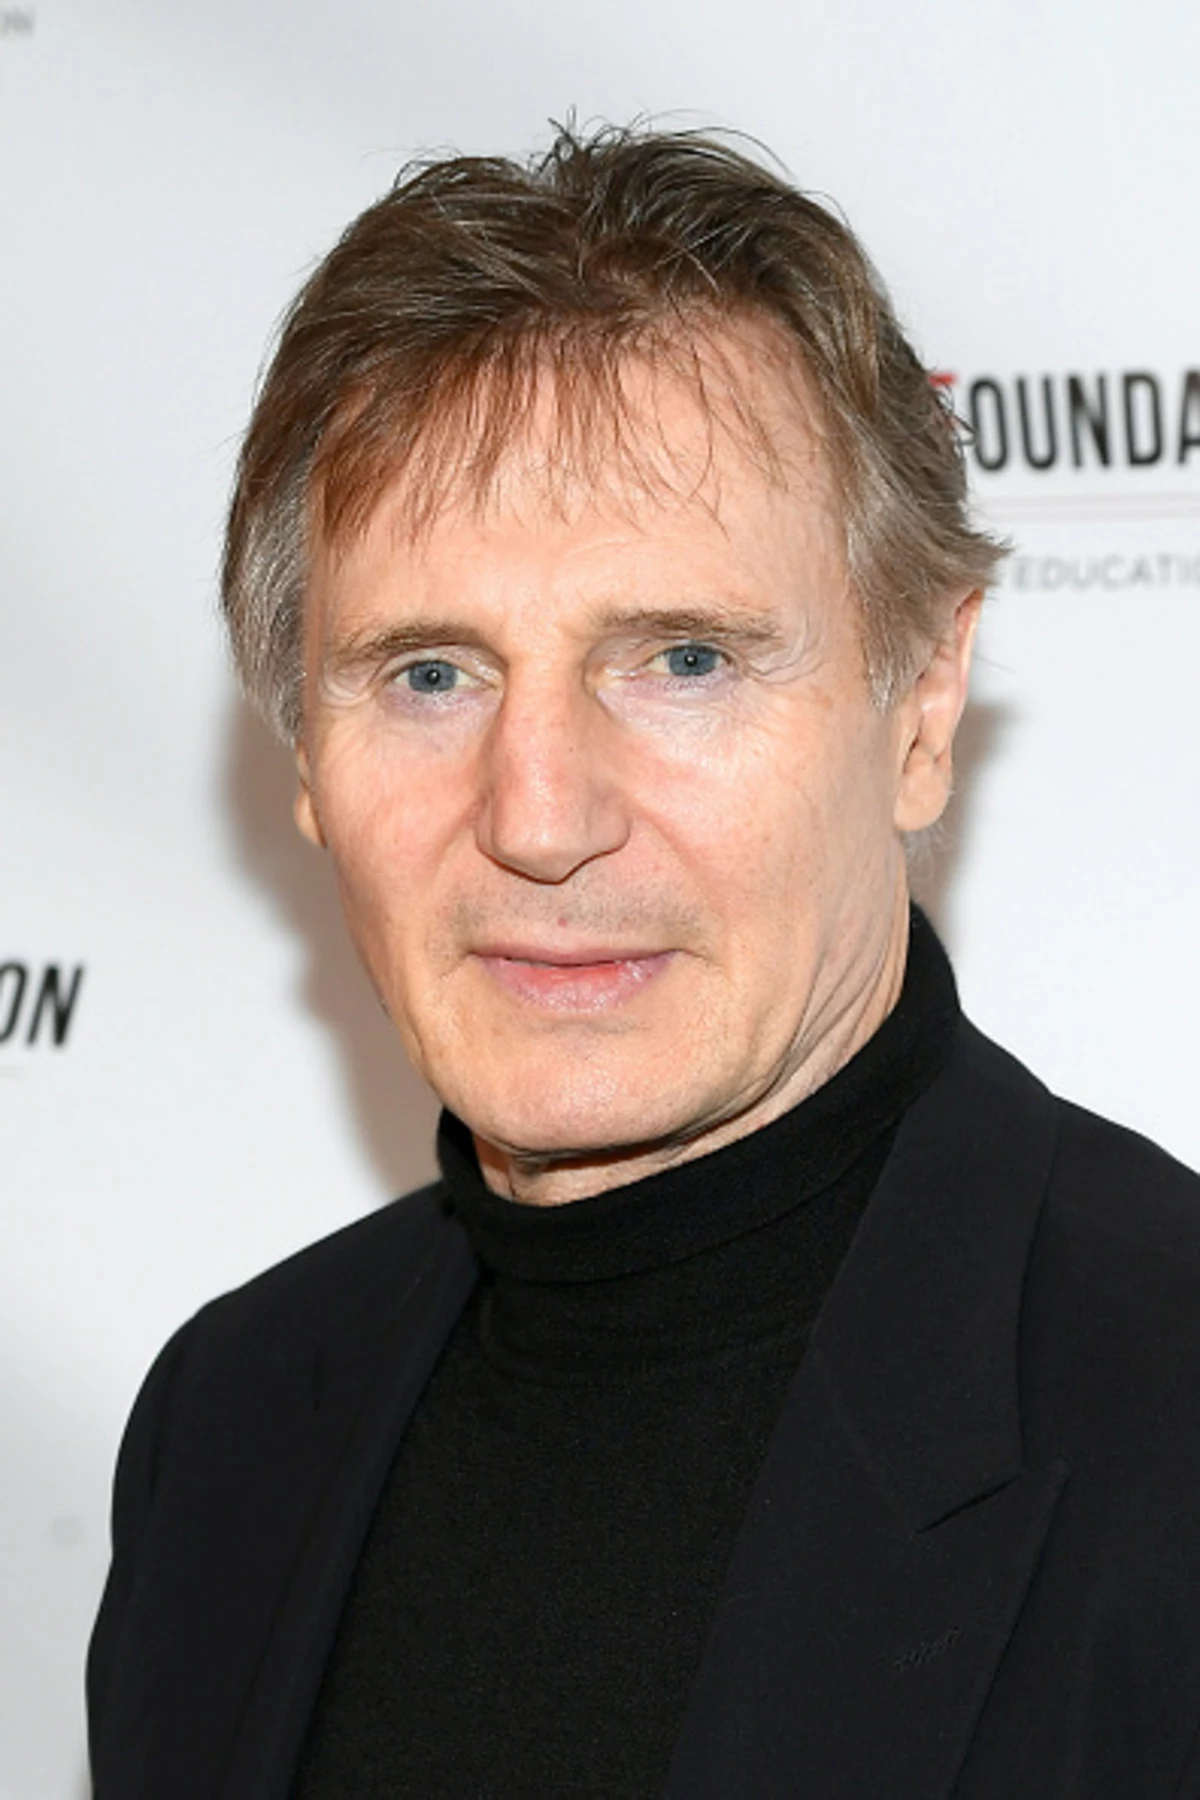 Liam Neeson Claims He's Not A Racist.